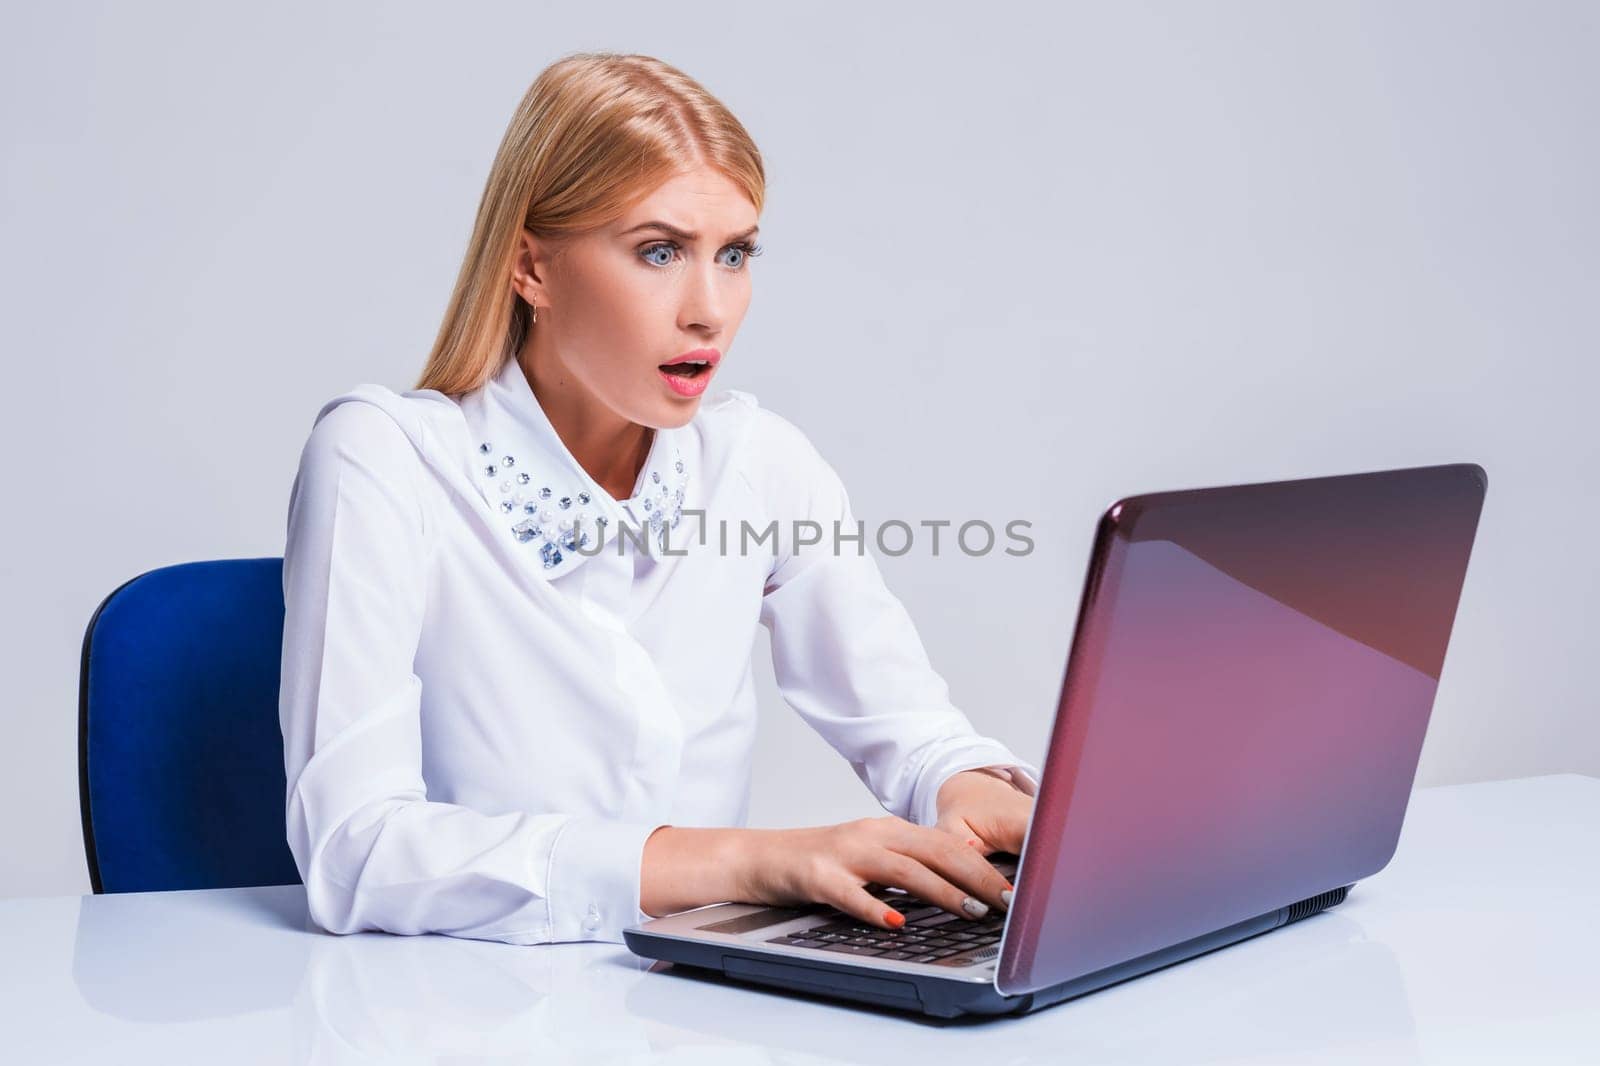 Young businesswoman working at laptop computer. pleasantly surprised dissatisfied girl